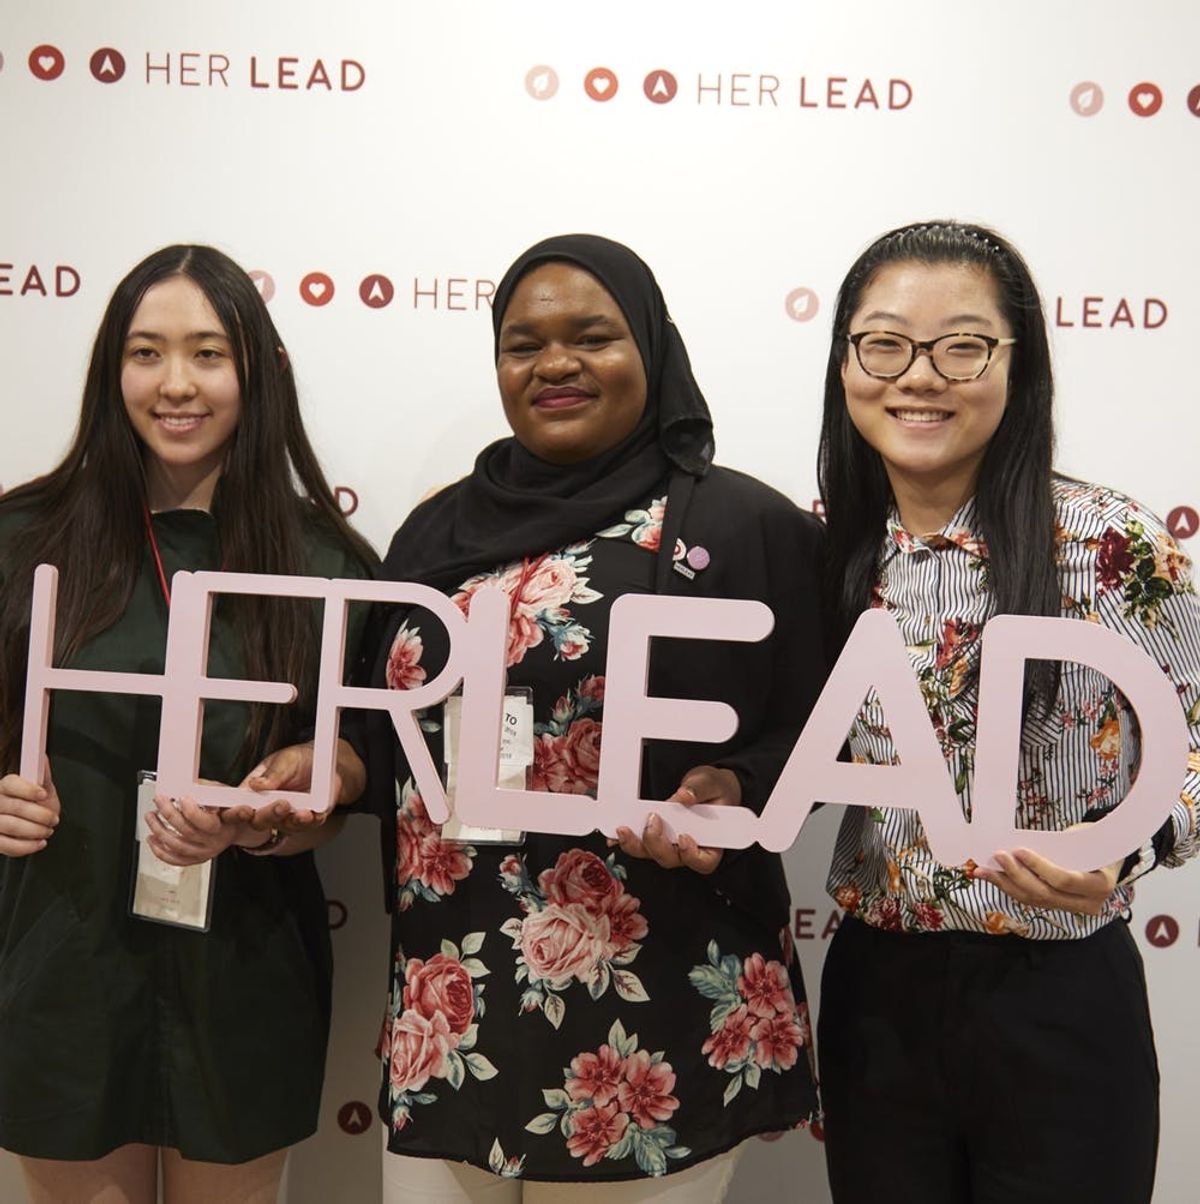 This Fellowship Program for Teen Girls Who Want to Change the World Is Accepting Applications